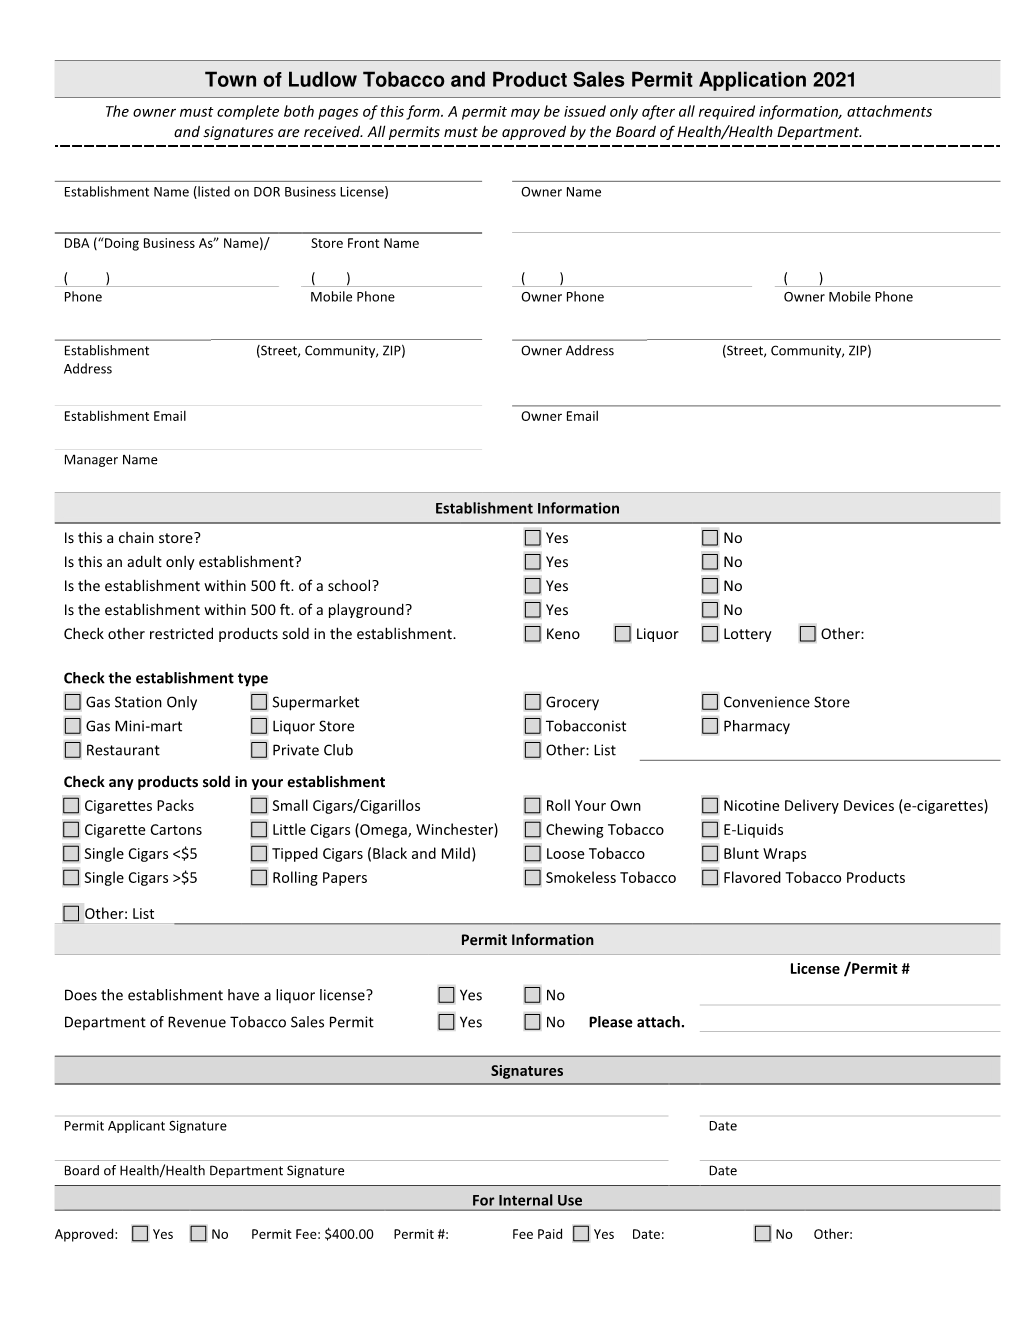 Town of Ludlow Tobacco and Product Sales Permit Application 2021 the Owner Must Complete Both Pages of This Form